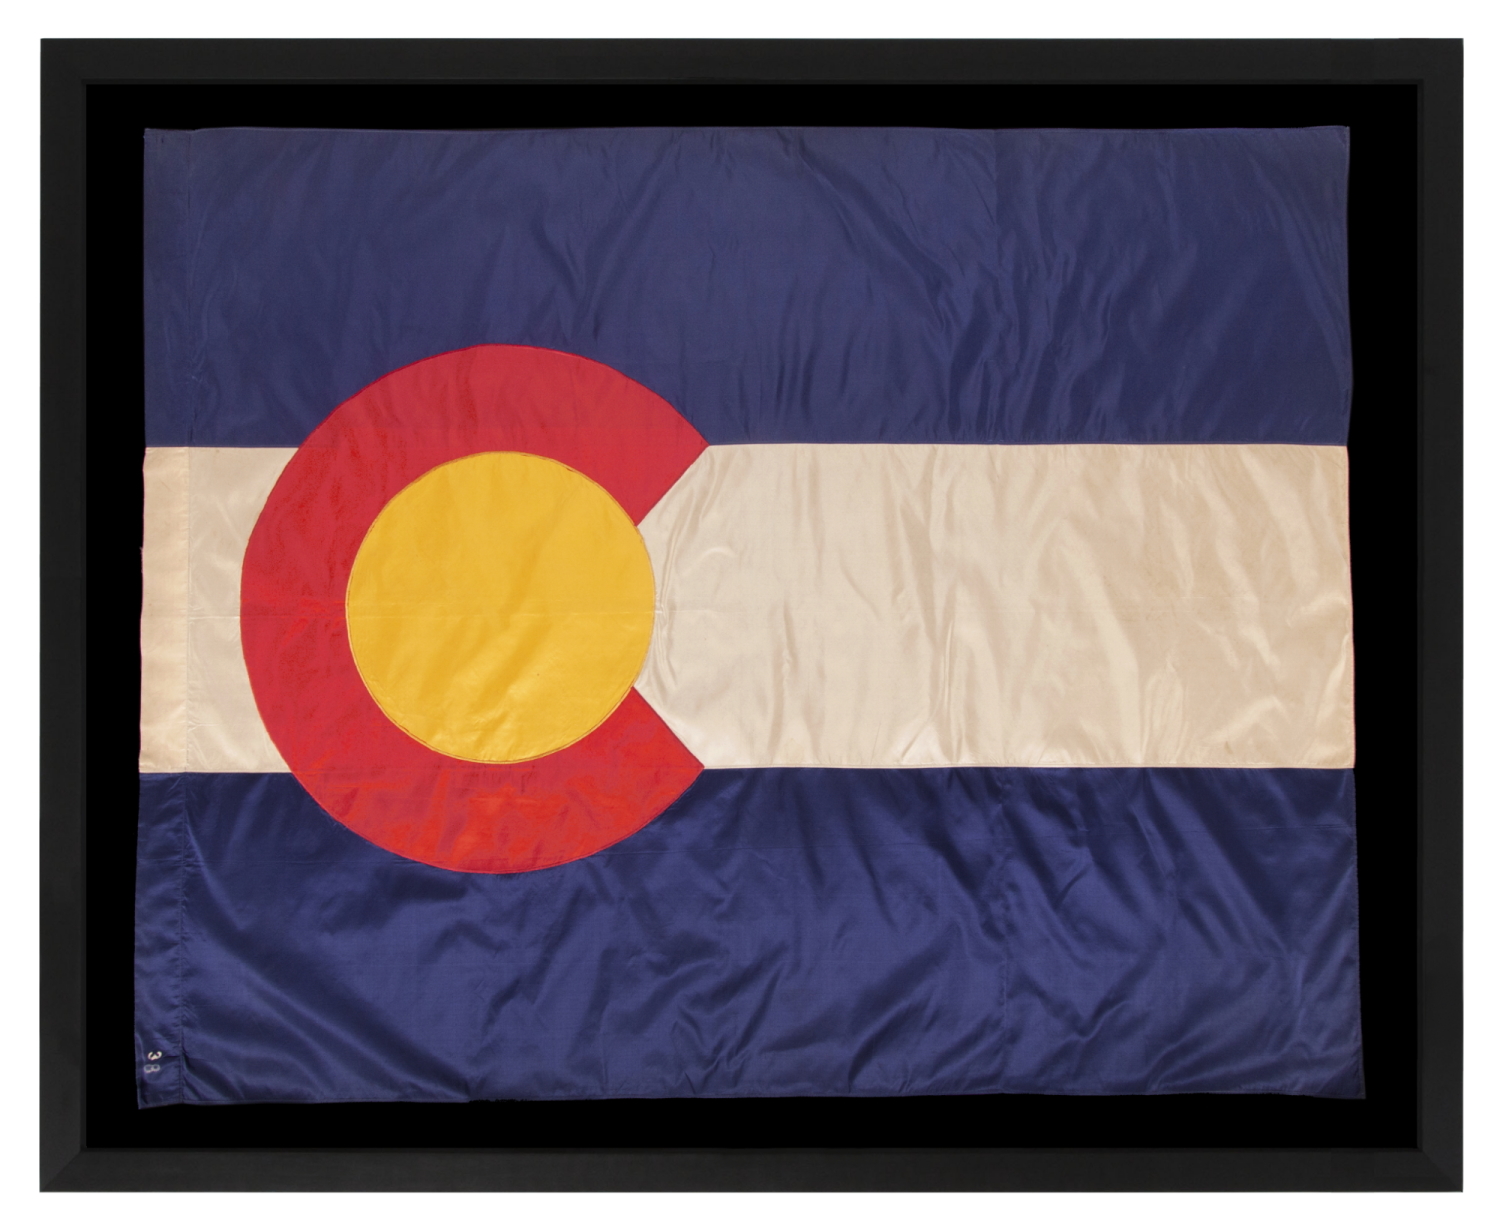 COLORADO STATE FLAG OF EXCEPTIONAL QUALITY, MADE OF SILK, CIRCA 1911-1920’s, EXTRAORDINARILY RARE IN THIS PERIOD AND THE EARLIEST EXAMPLE THAT I HAVE EVER ENCOUNTERED